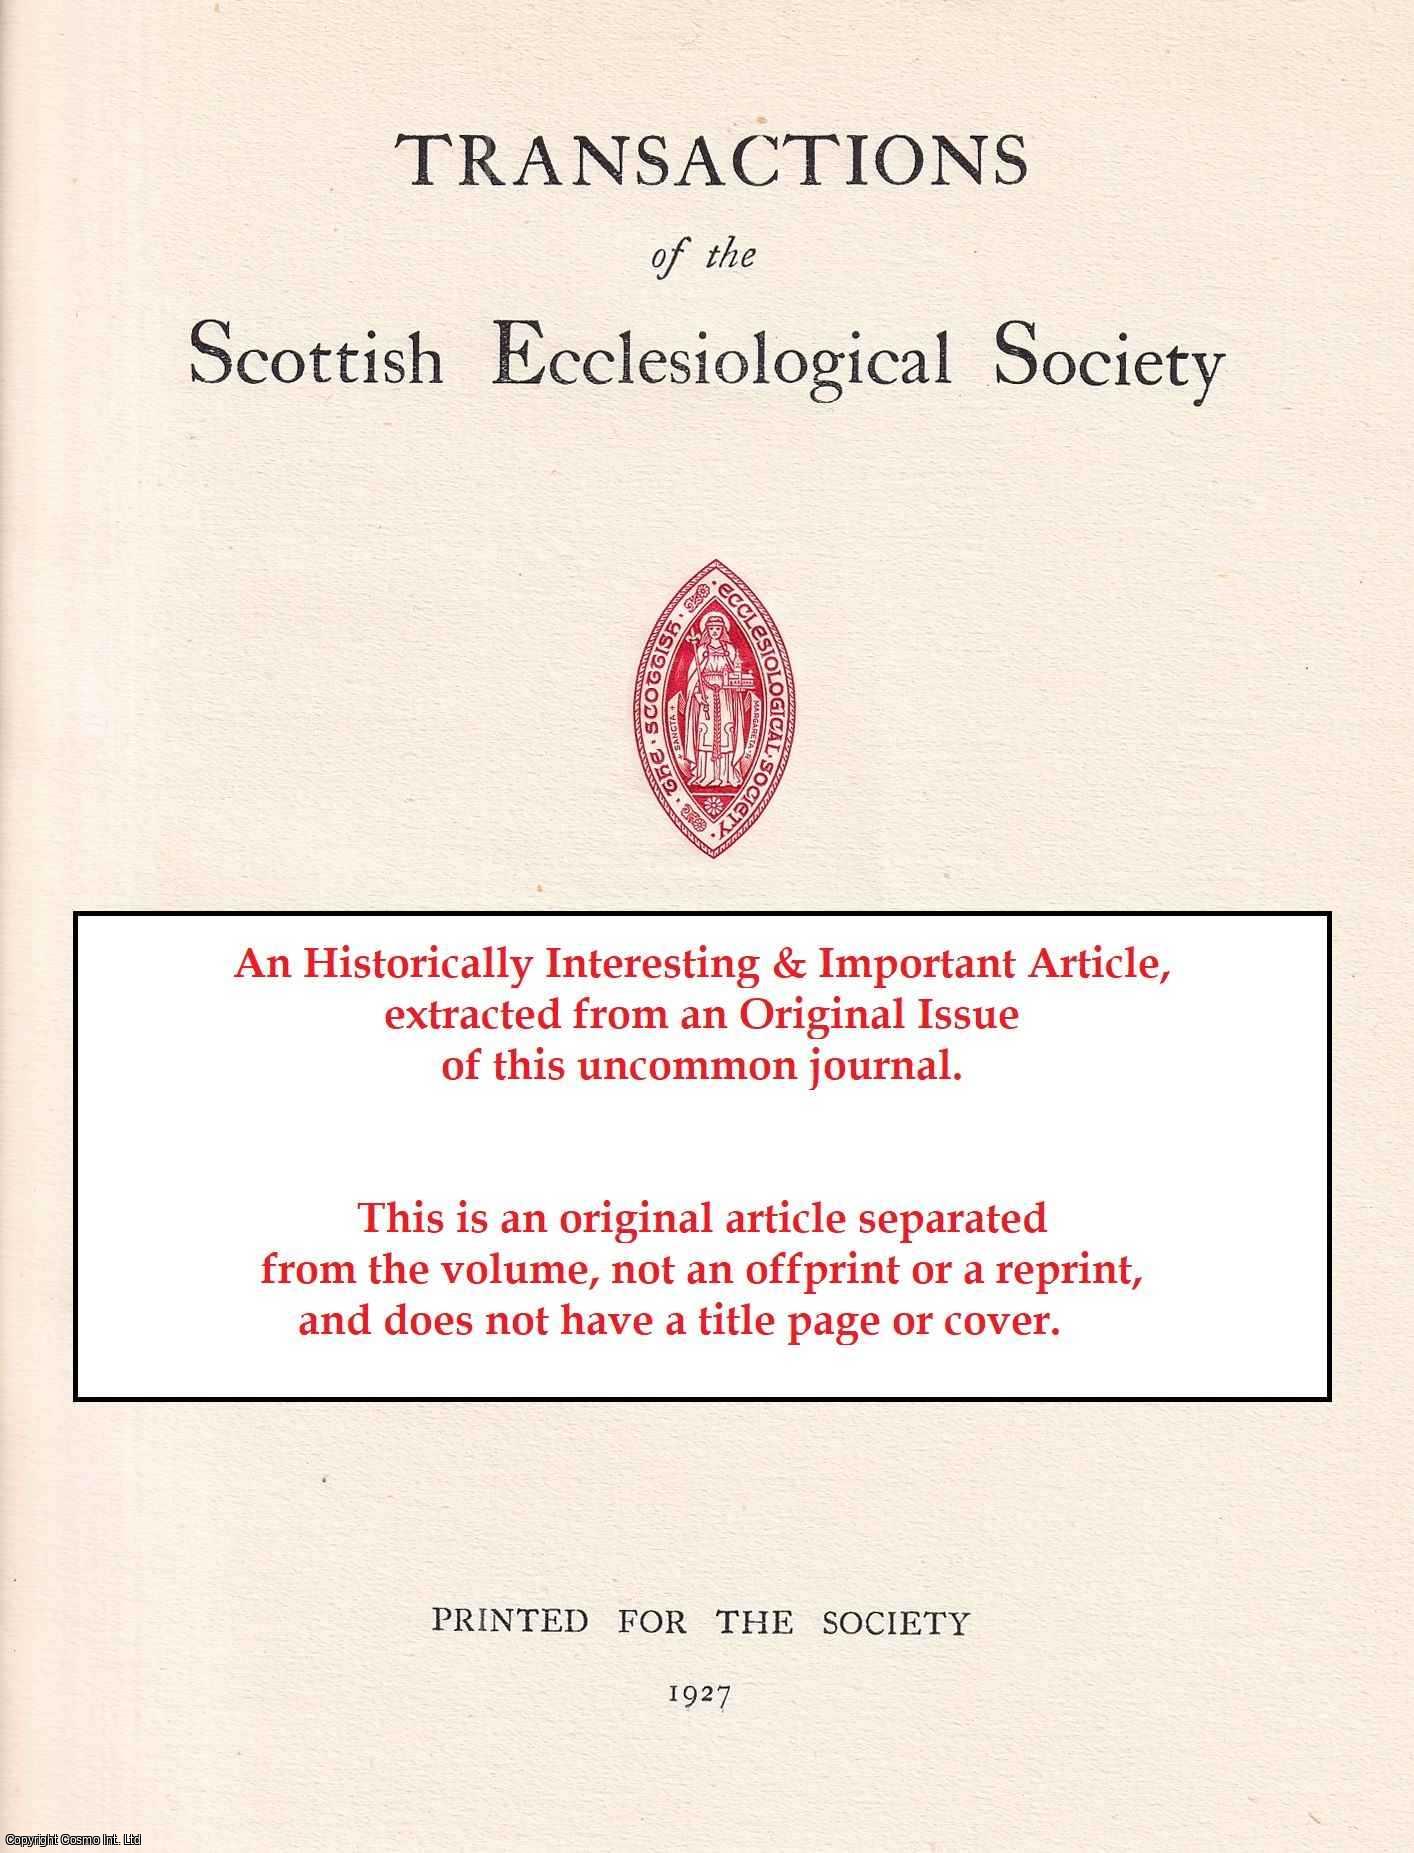 Rev William Barr Macfarlane - The Church of the Clan Macfarlane. An original article from the Transactions of the Scottish Ecclesiological Society, 1917.